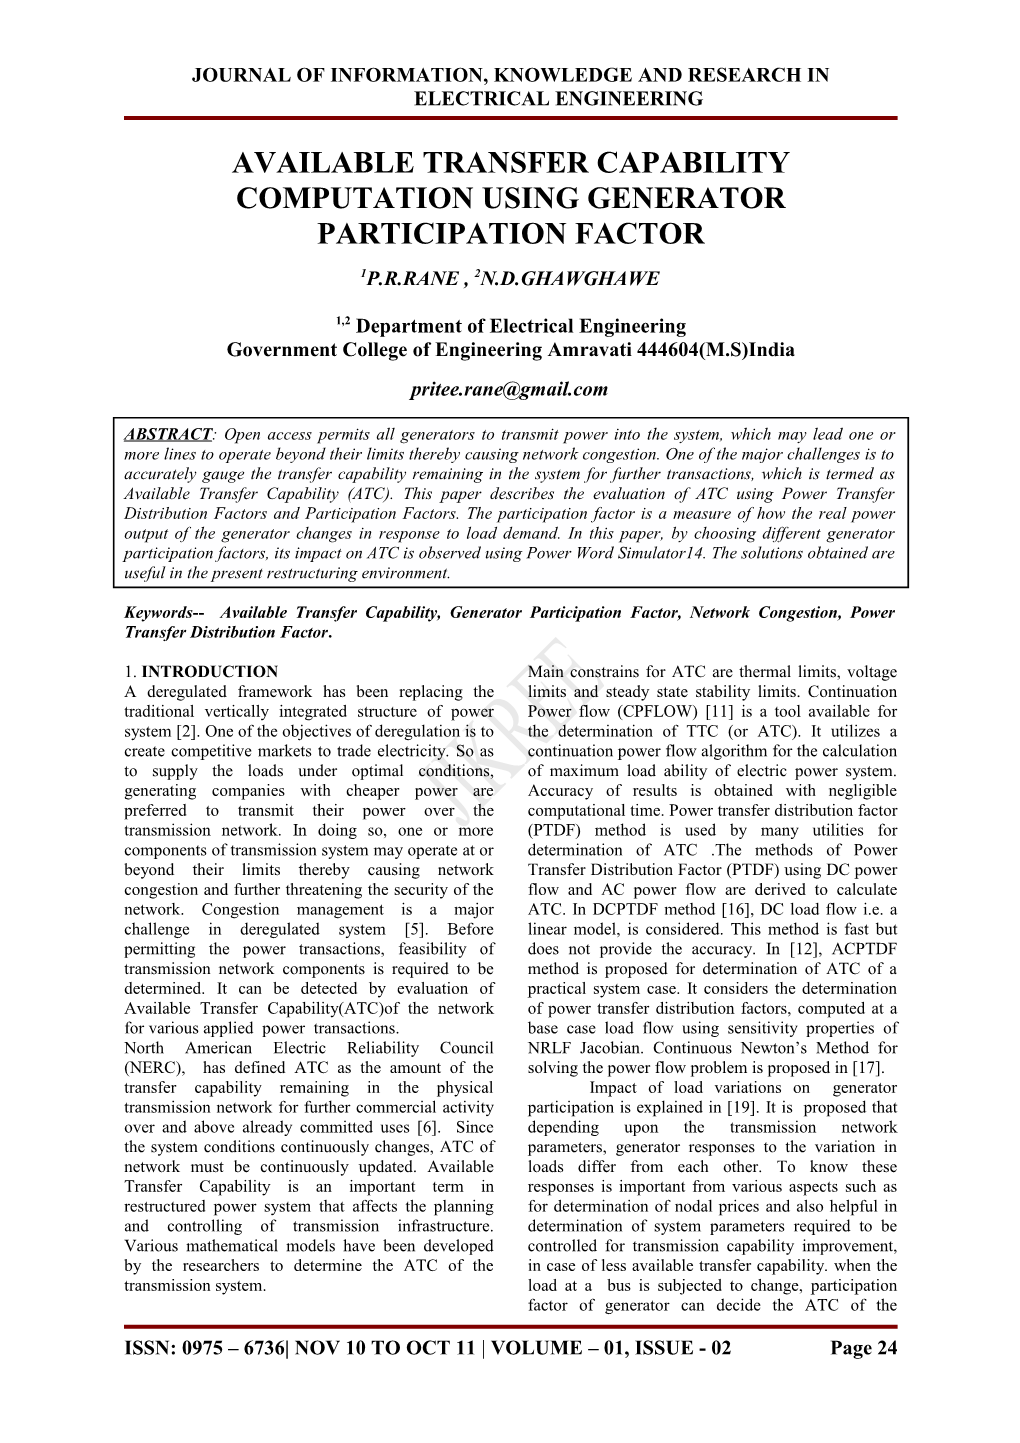 Available Transfer Capability Computation Using Generator Participation Factor